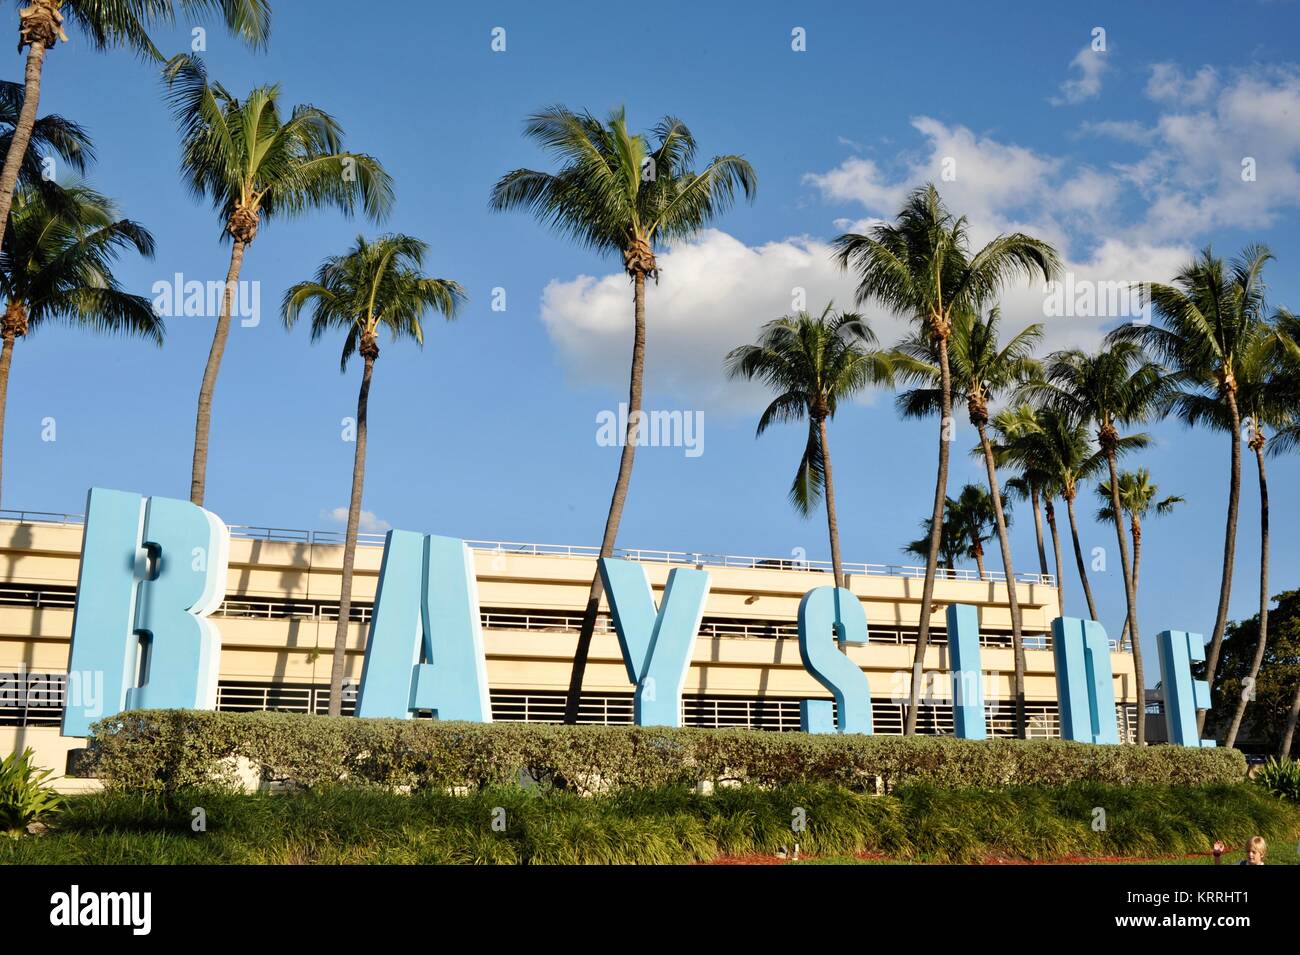 Bayside sign with tropical palm trees, blue sky and urban buildings, outside Bayside Marketplace in Miami, Florida, USA. Stock Photo